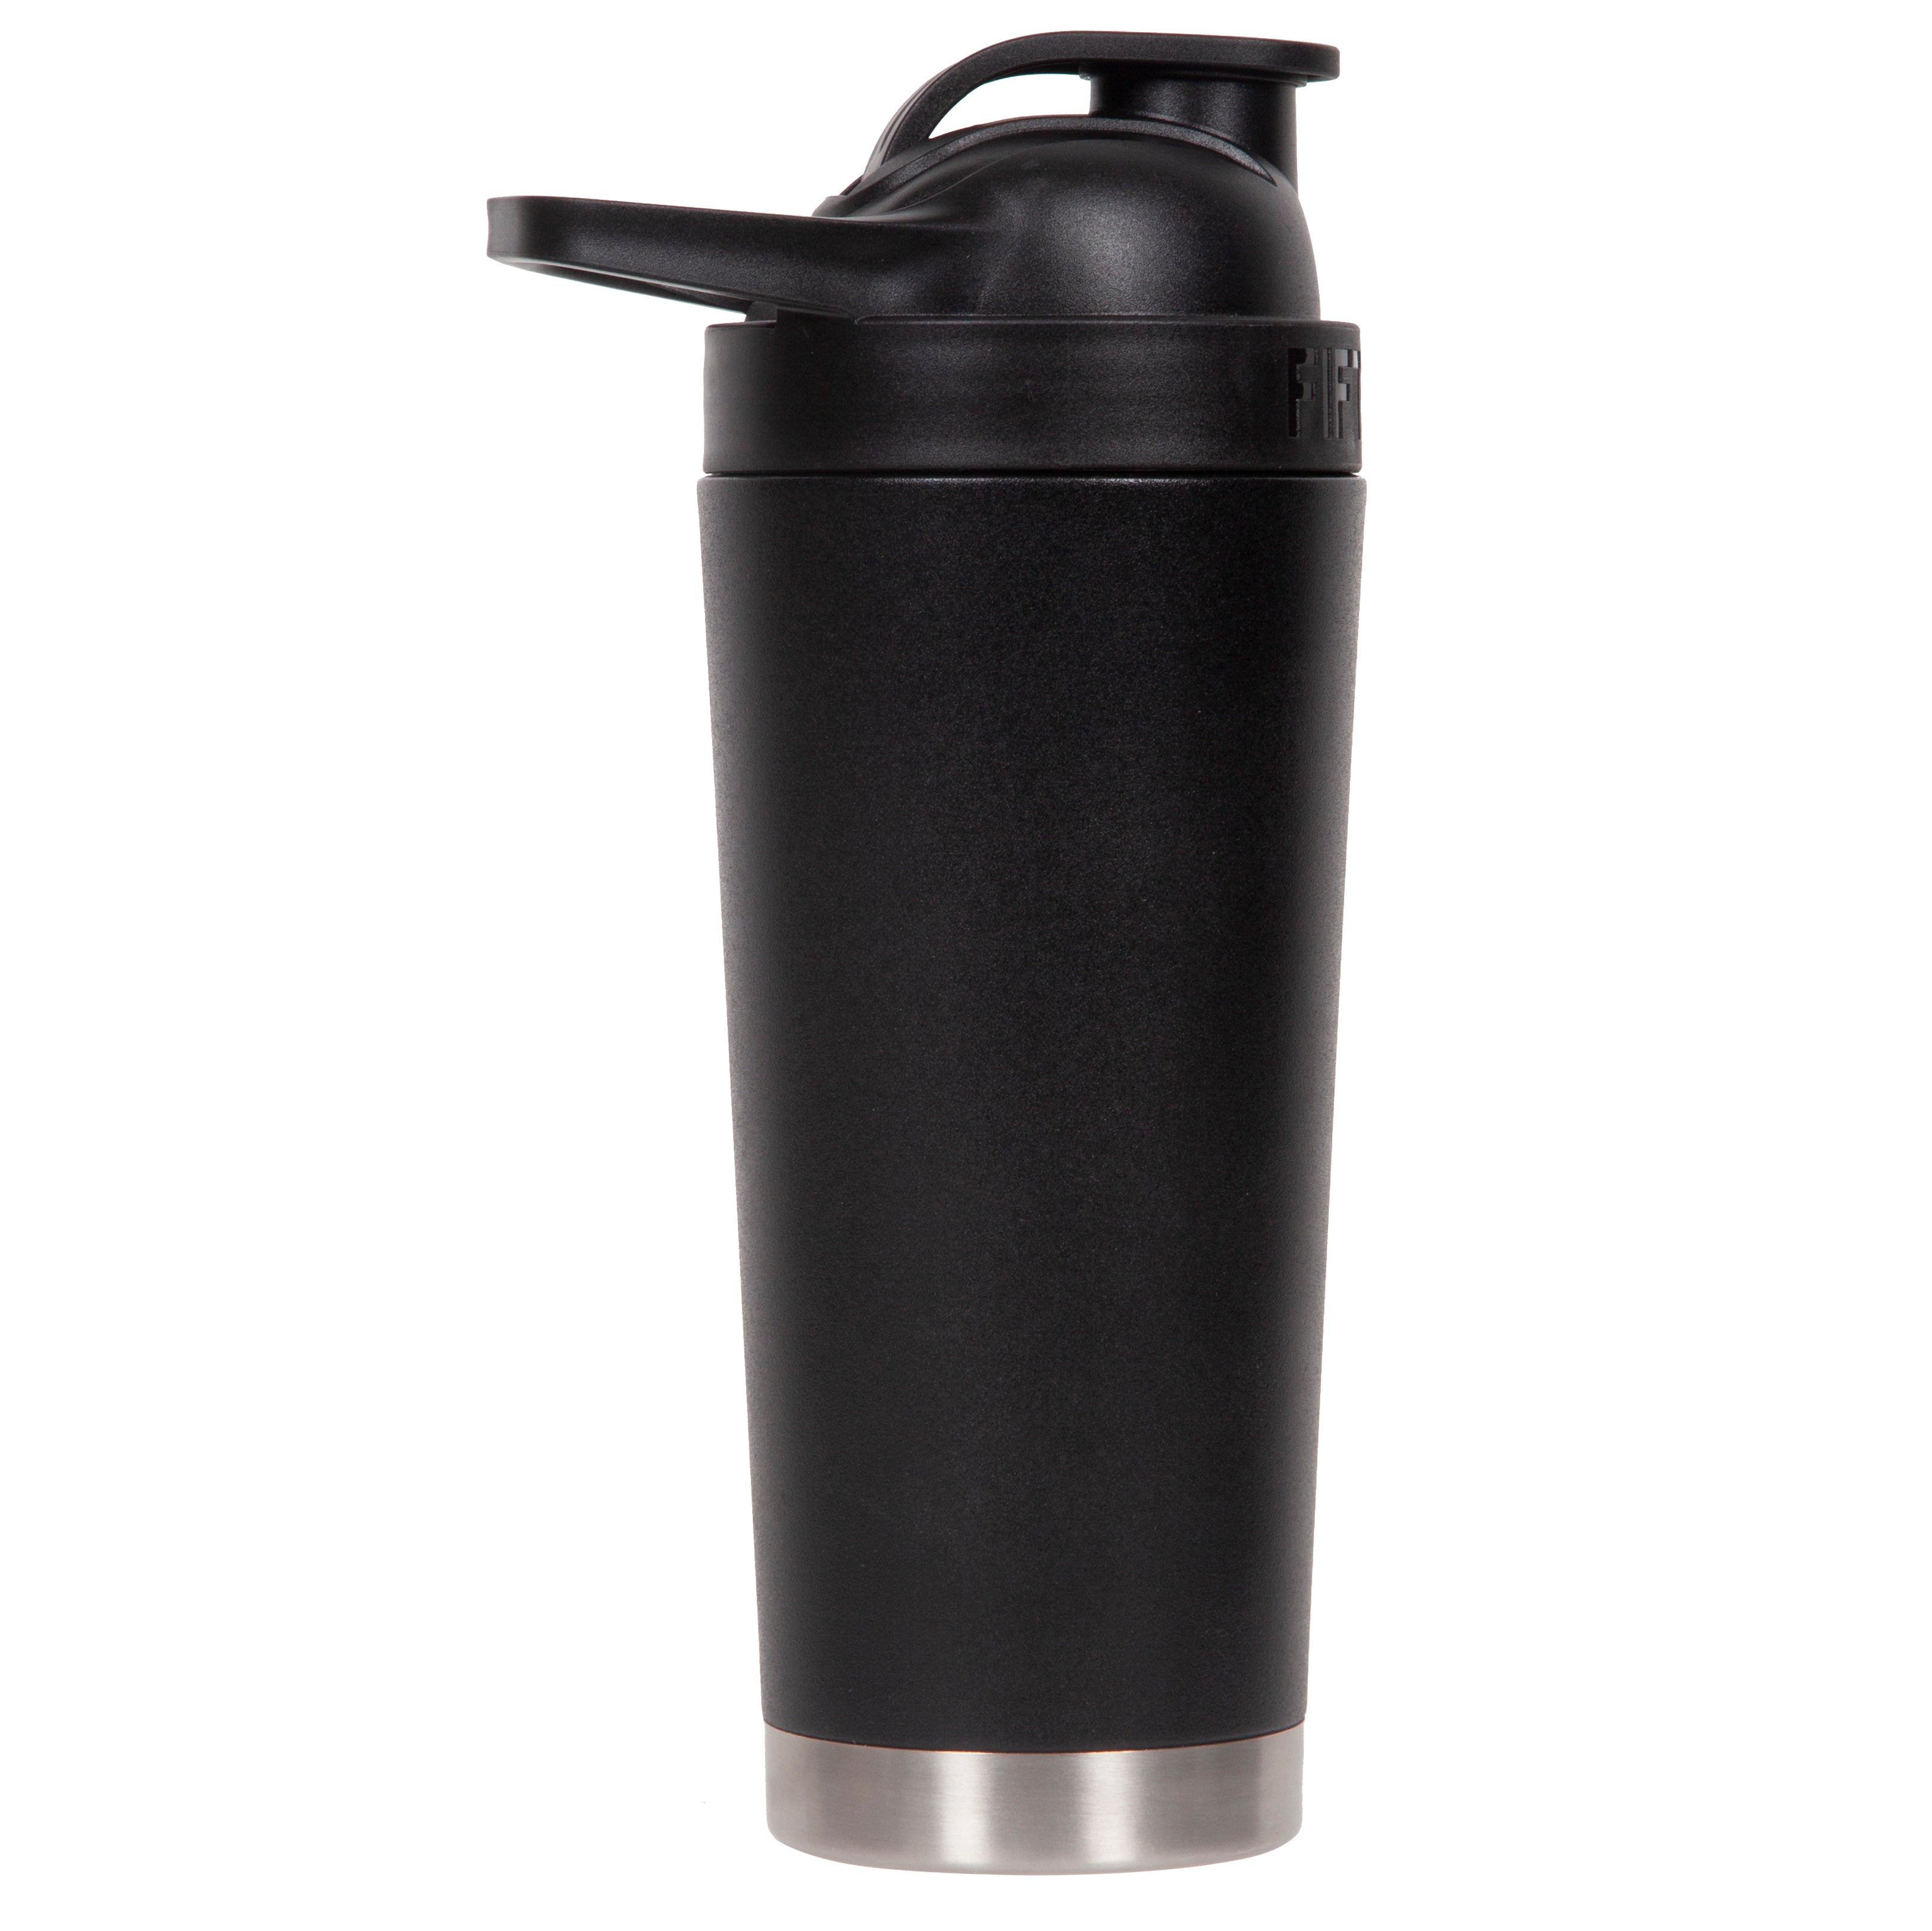 25oz Stainless Steel Protein Shaker Bottle With Mixing Ball